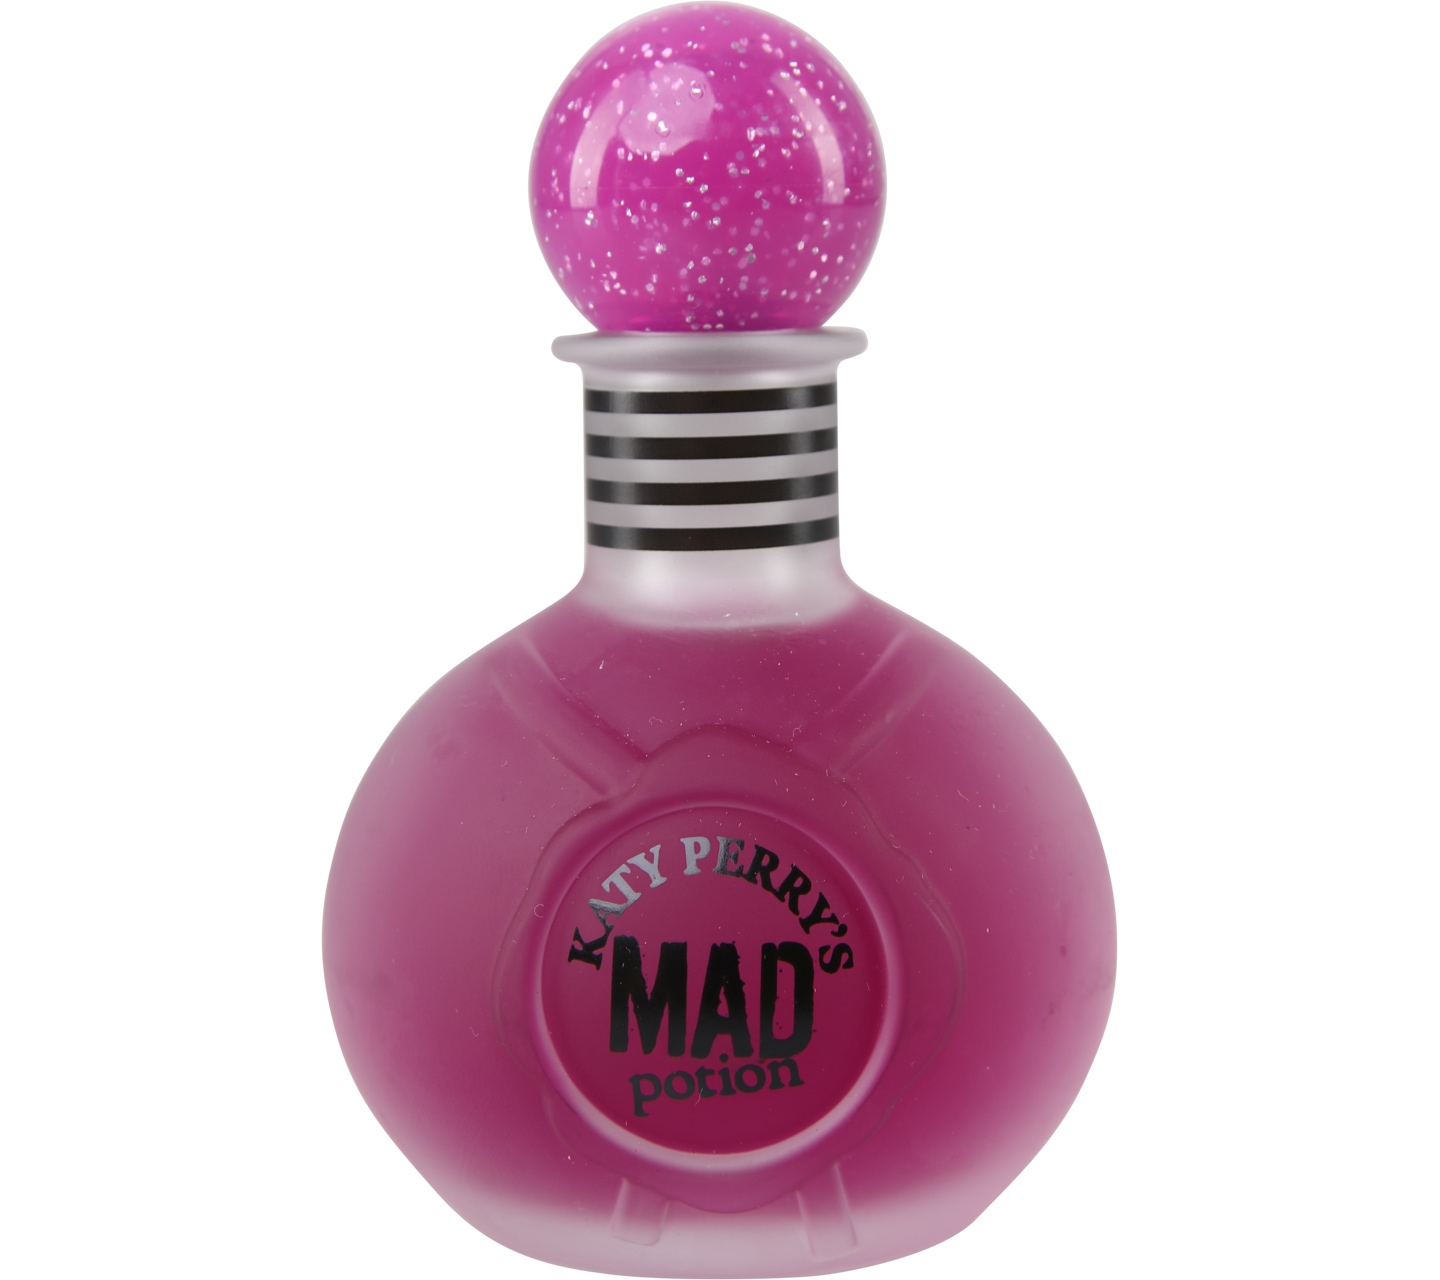 Katty Perry's Mad Potion Flammable Inflammable Fragrance